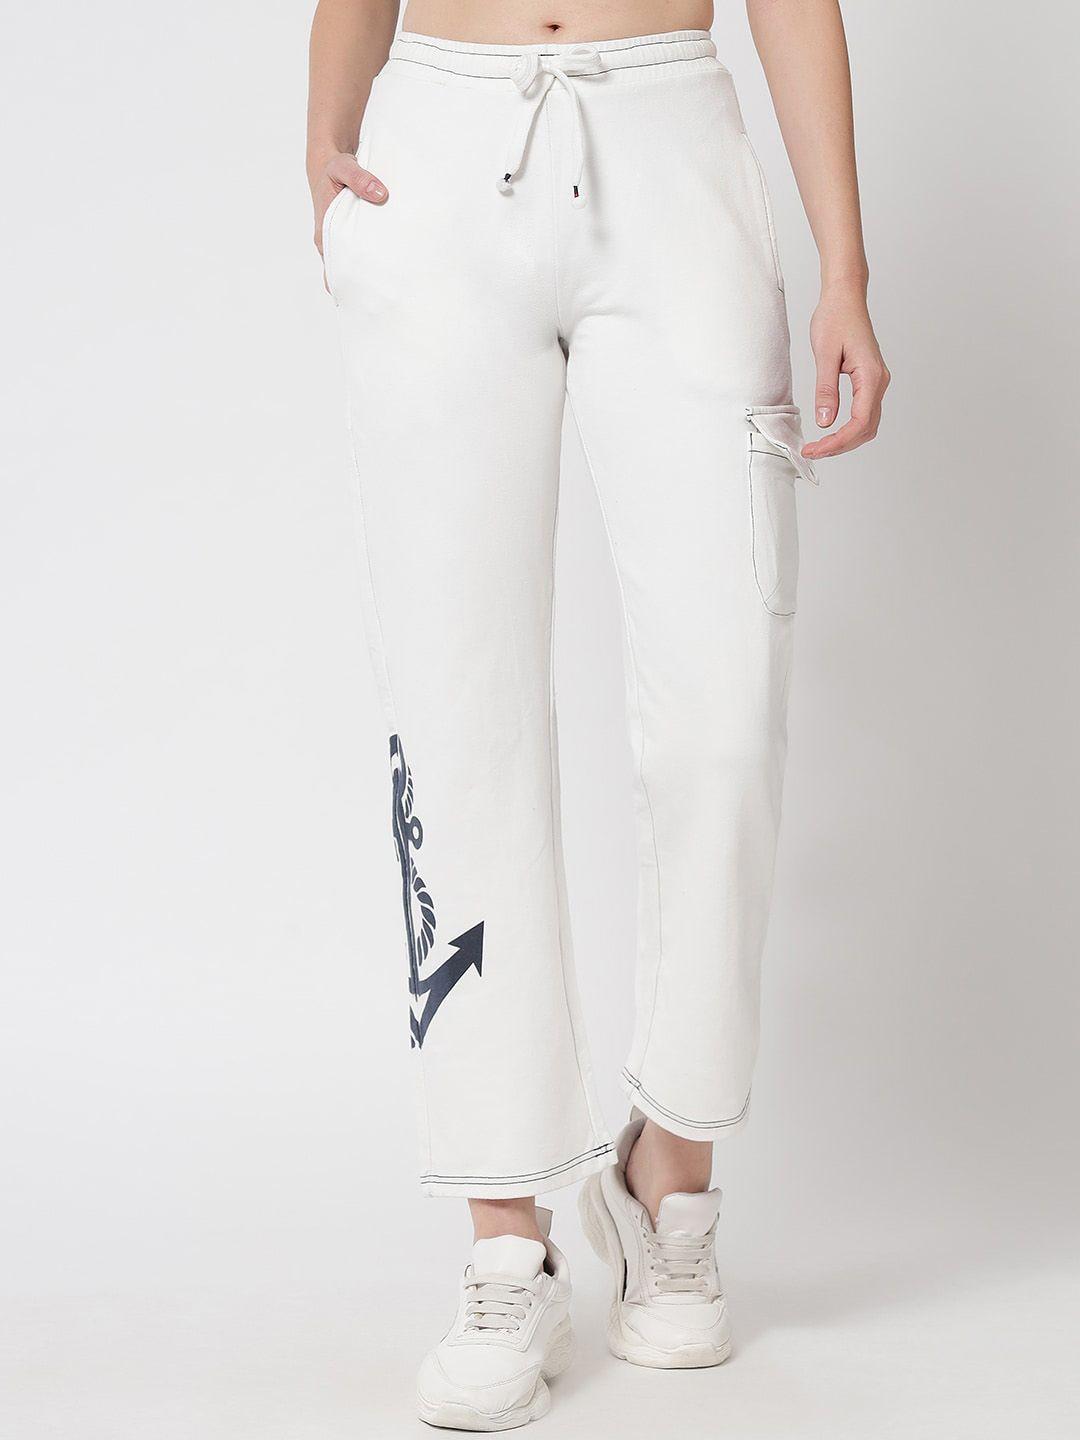 river of design jeans women white printed cotton track pants